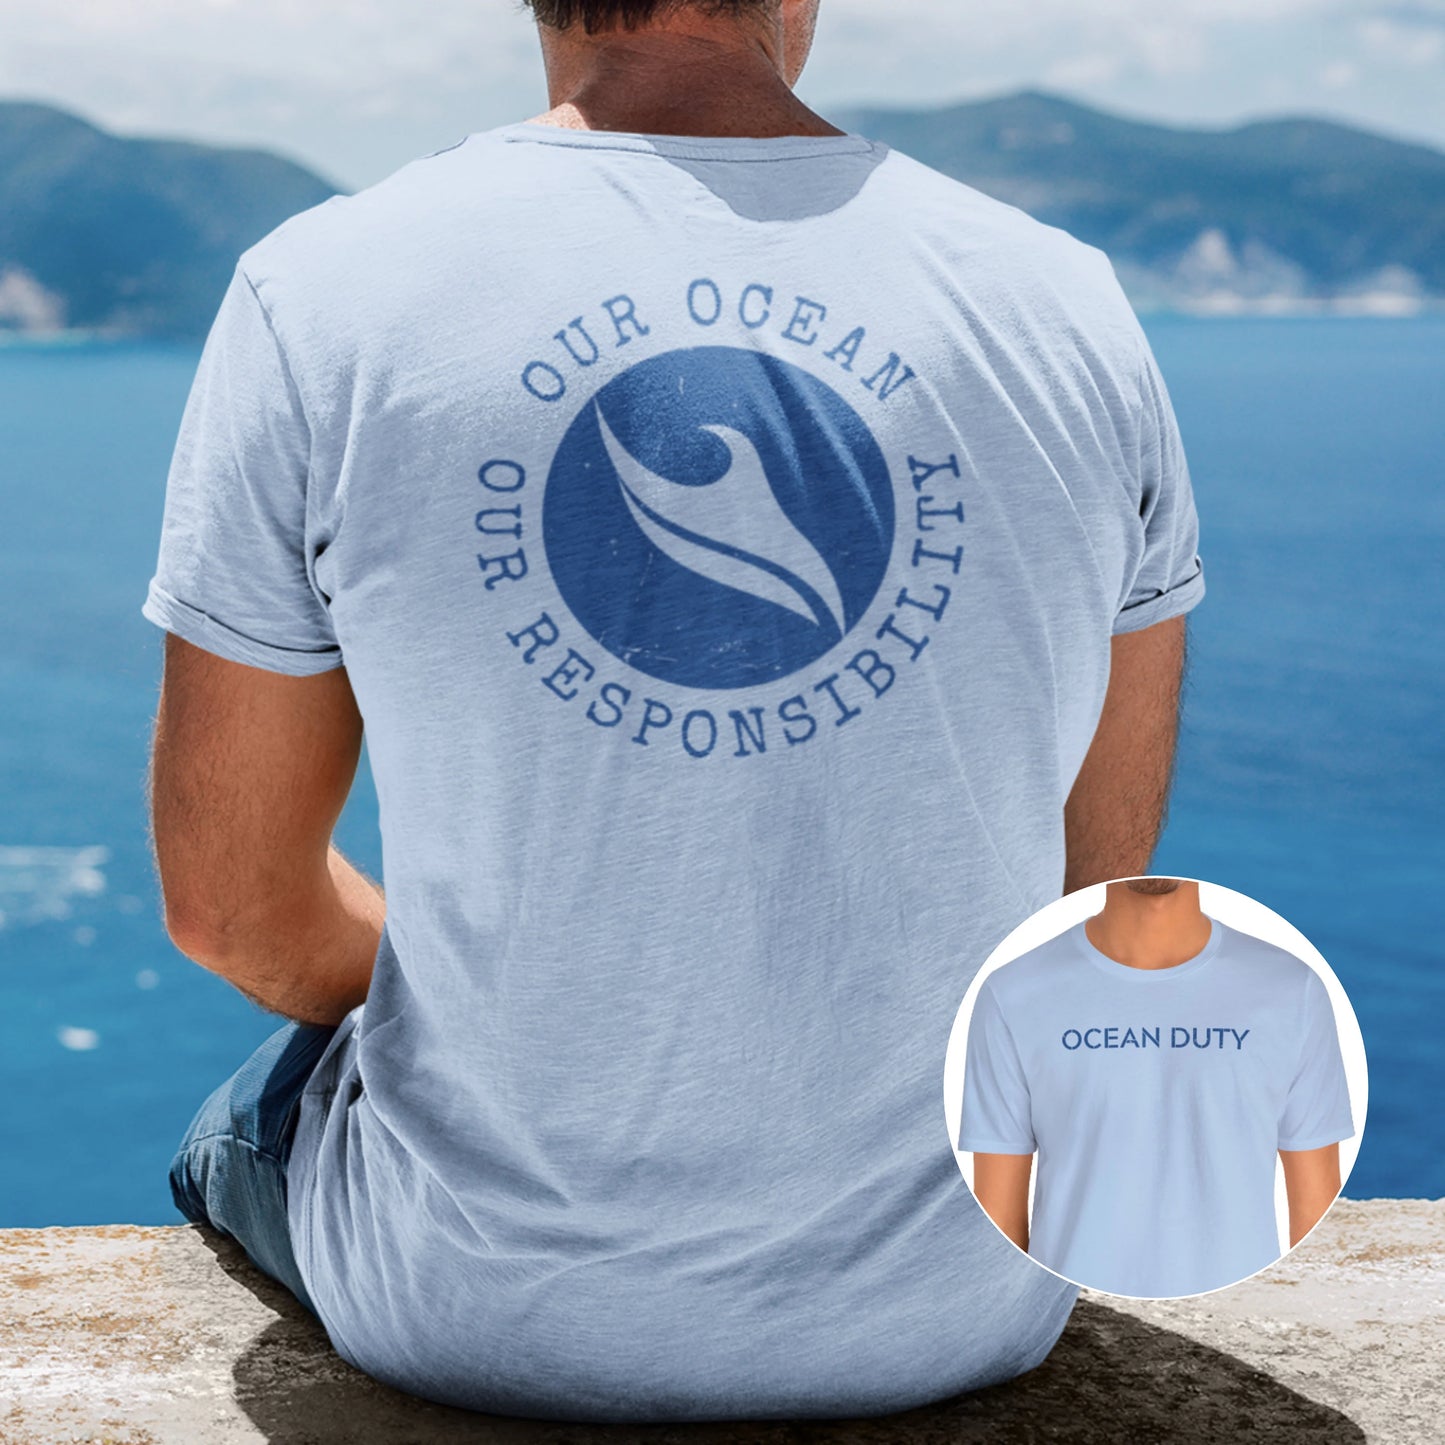 Our Ocean Responsibility Tee